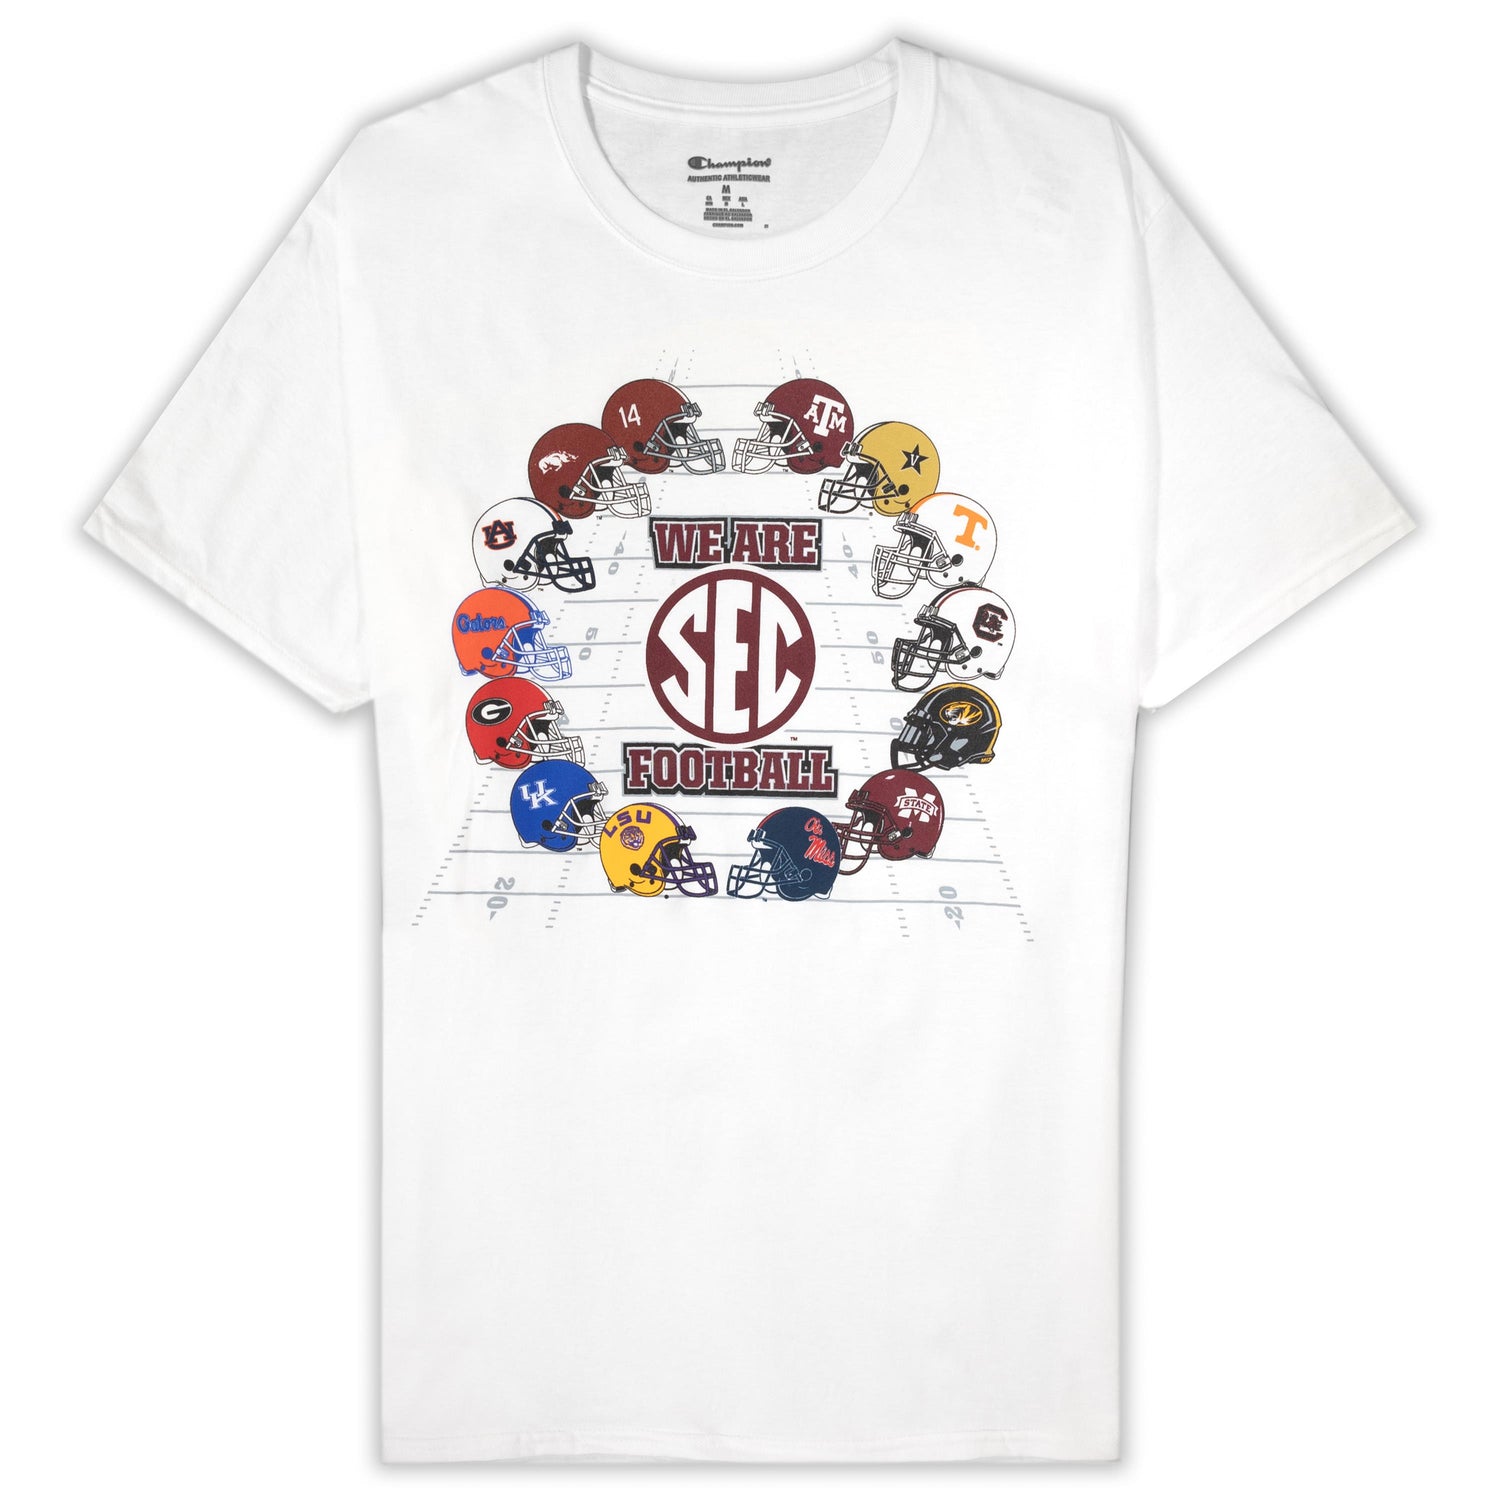 We Are SEC Football